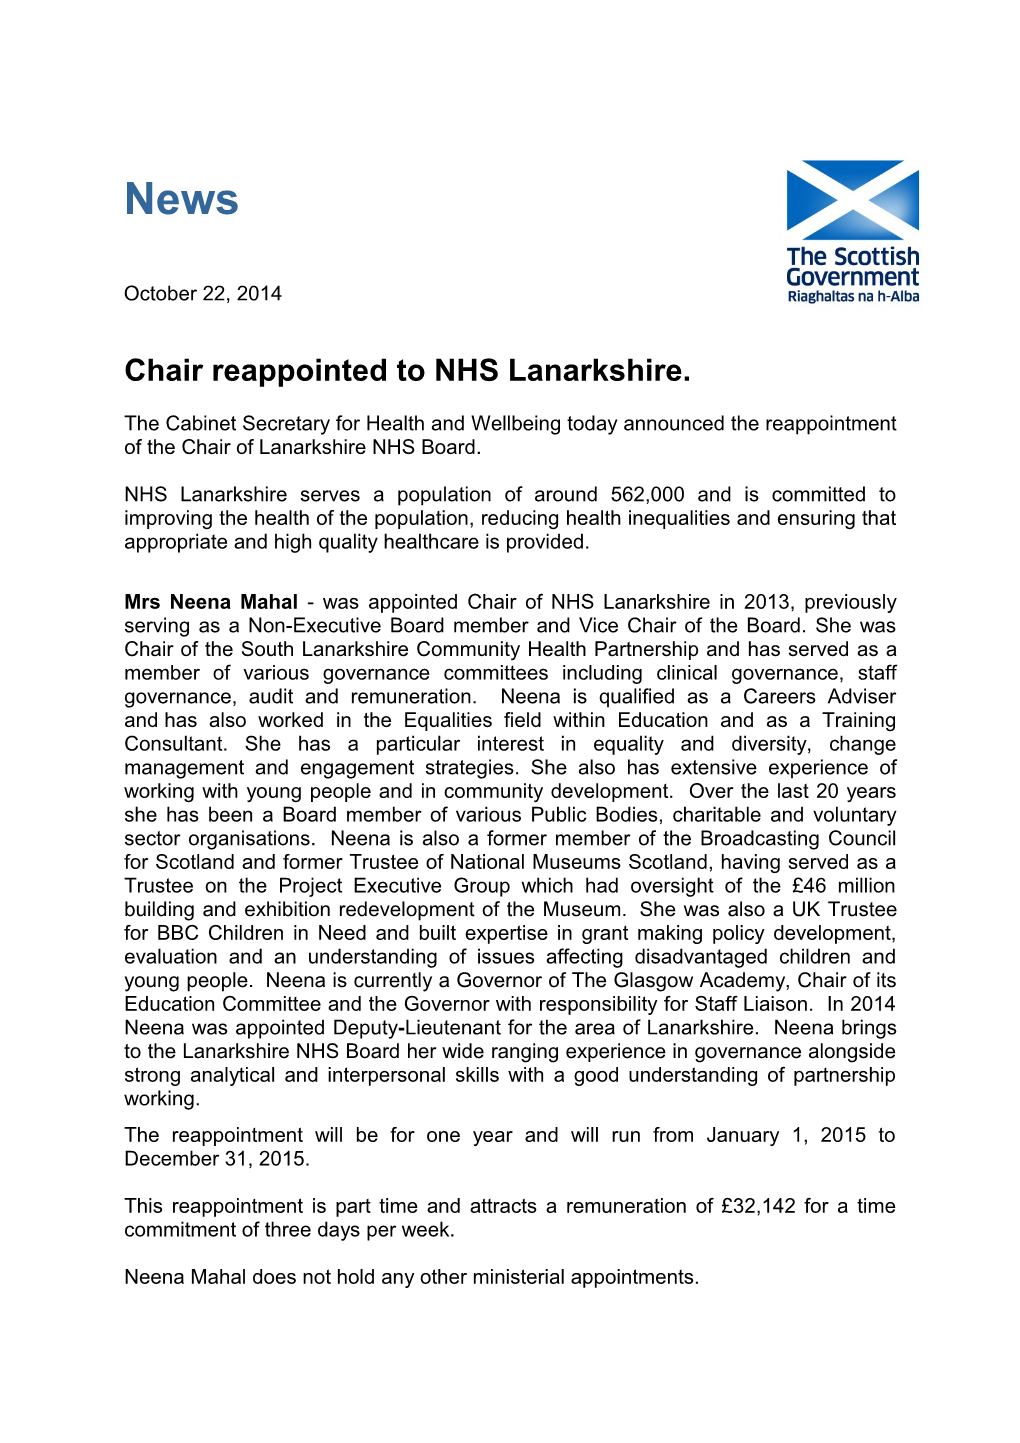 Chair Reappointed to NHS Lanarkshire